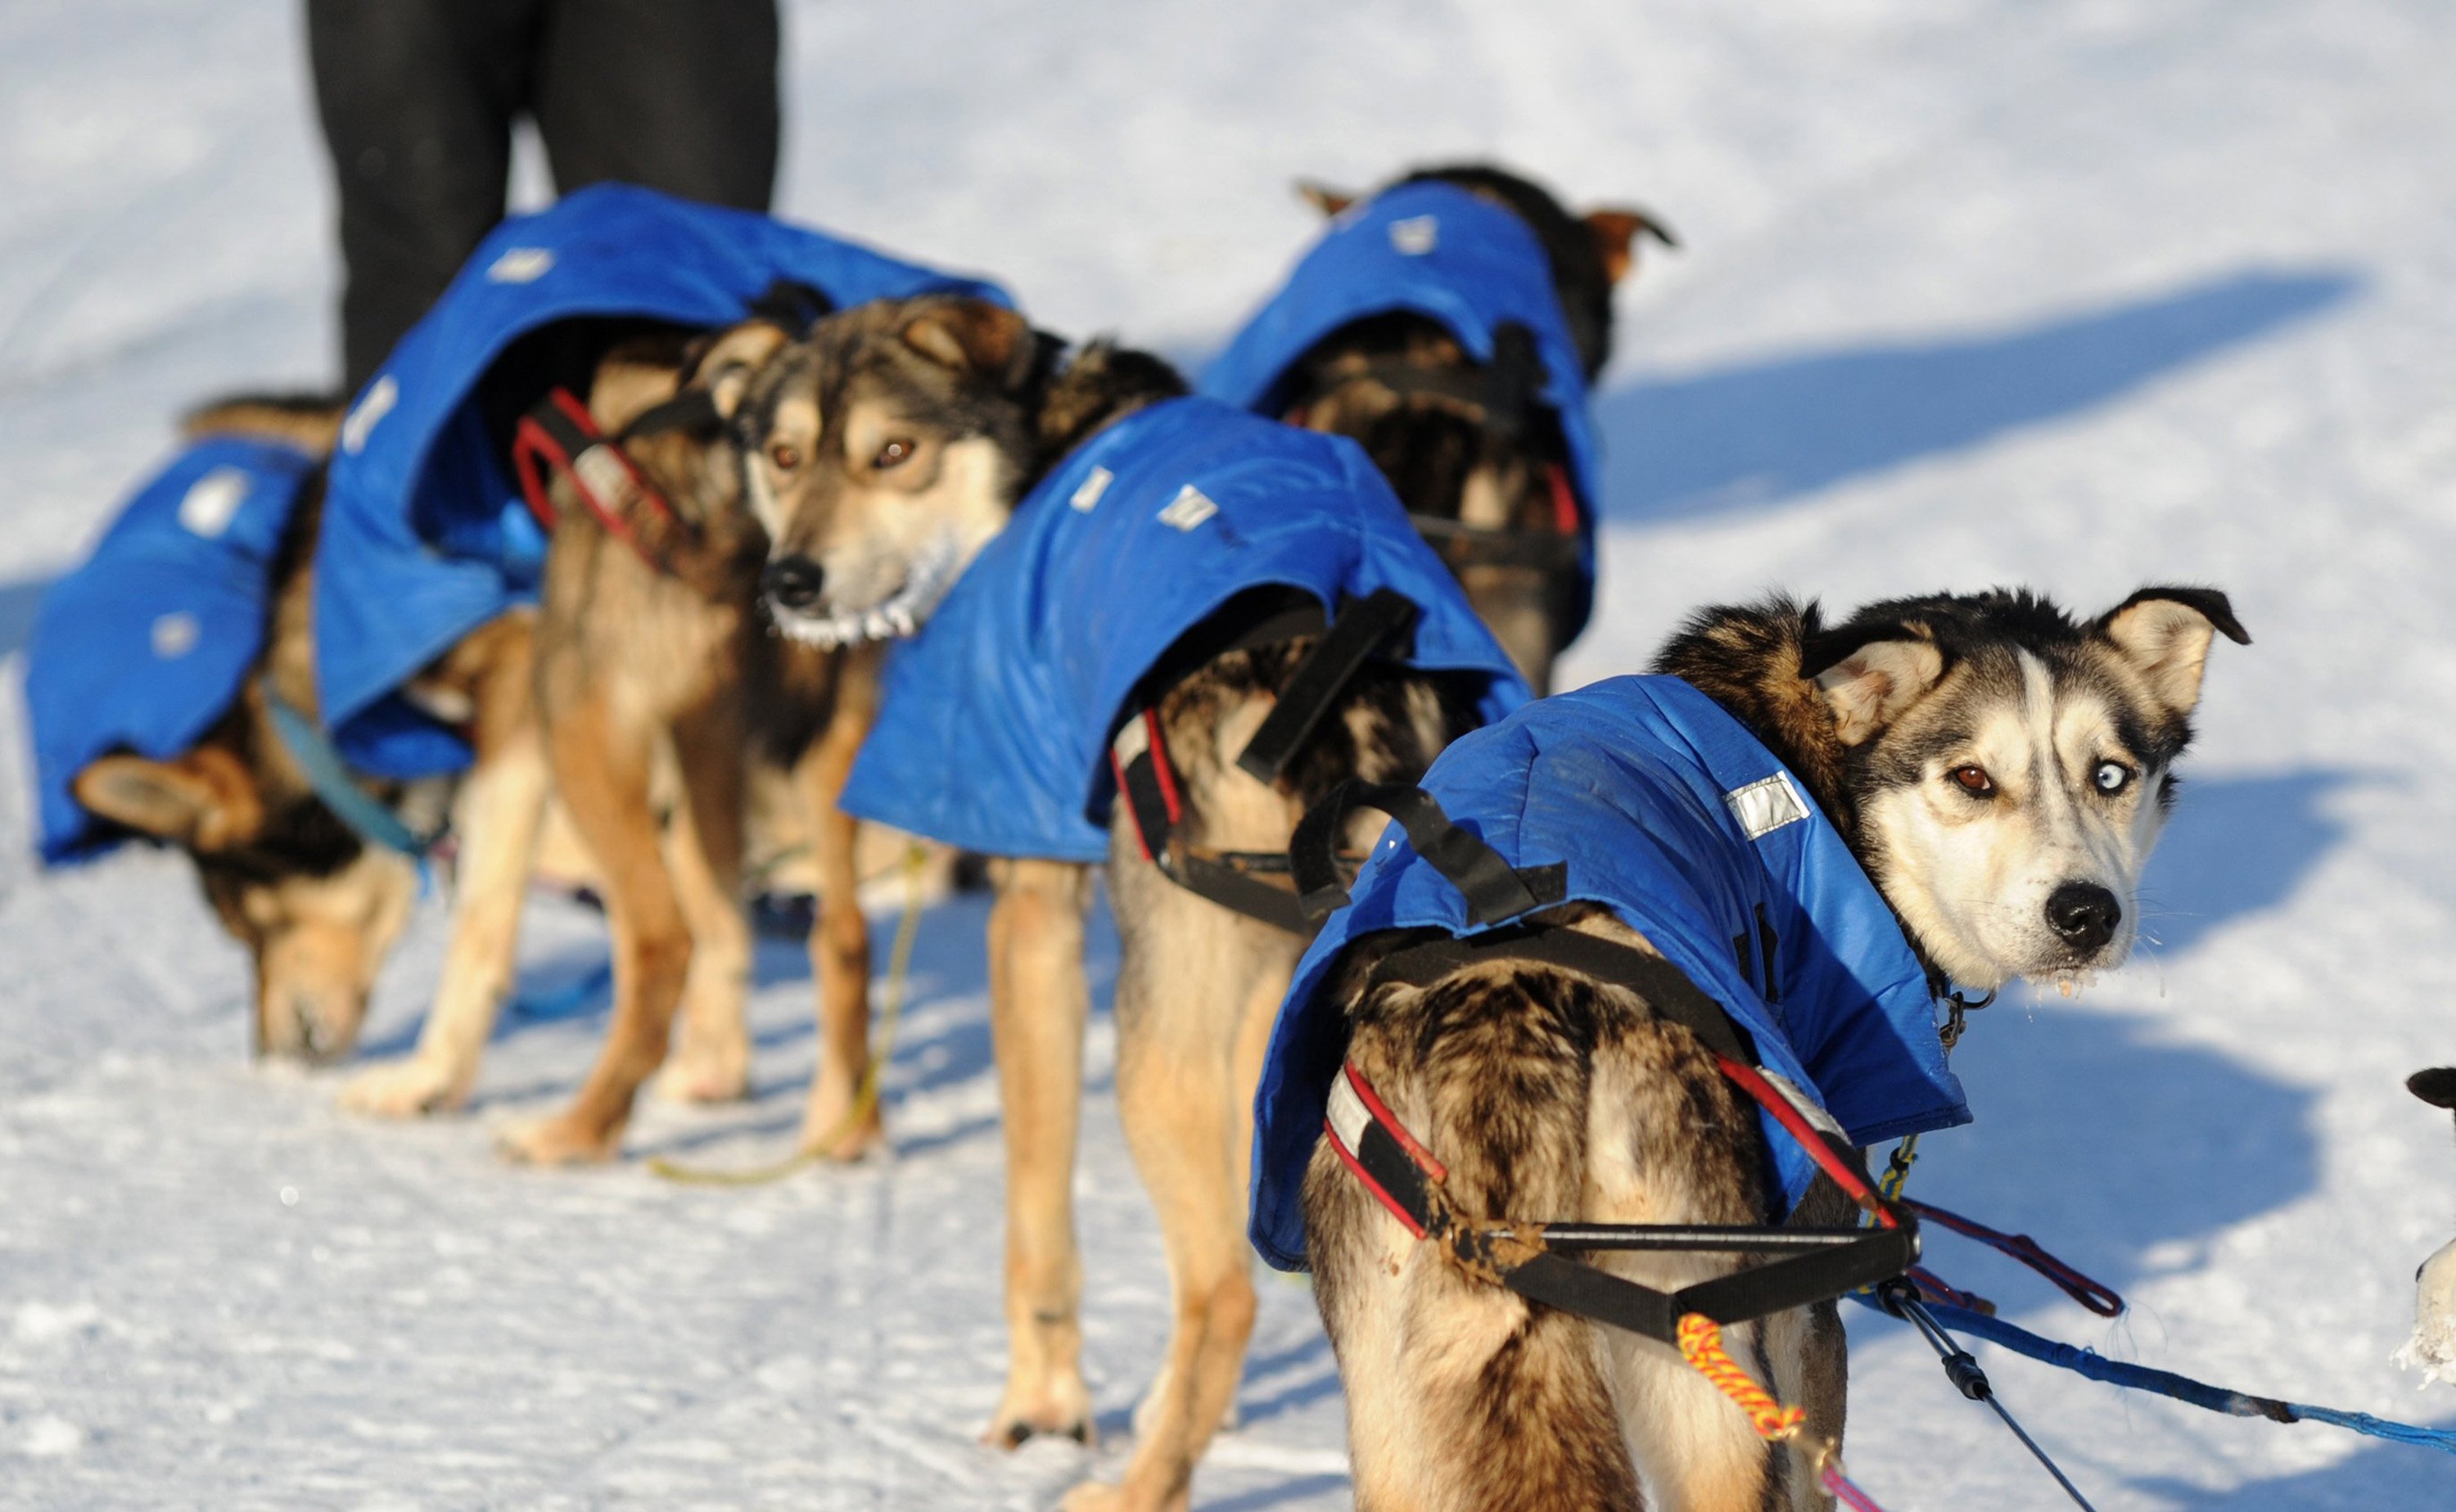 Mitch Seavey's dogs look back at the musher after they arrived at the White Mountain checkpoint during Alaska's Iditarod sled-dog race on March 10, 2014 (Anchorage Daily News&mdash;MCT via Getty Images)